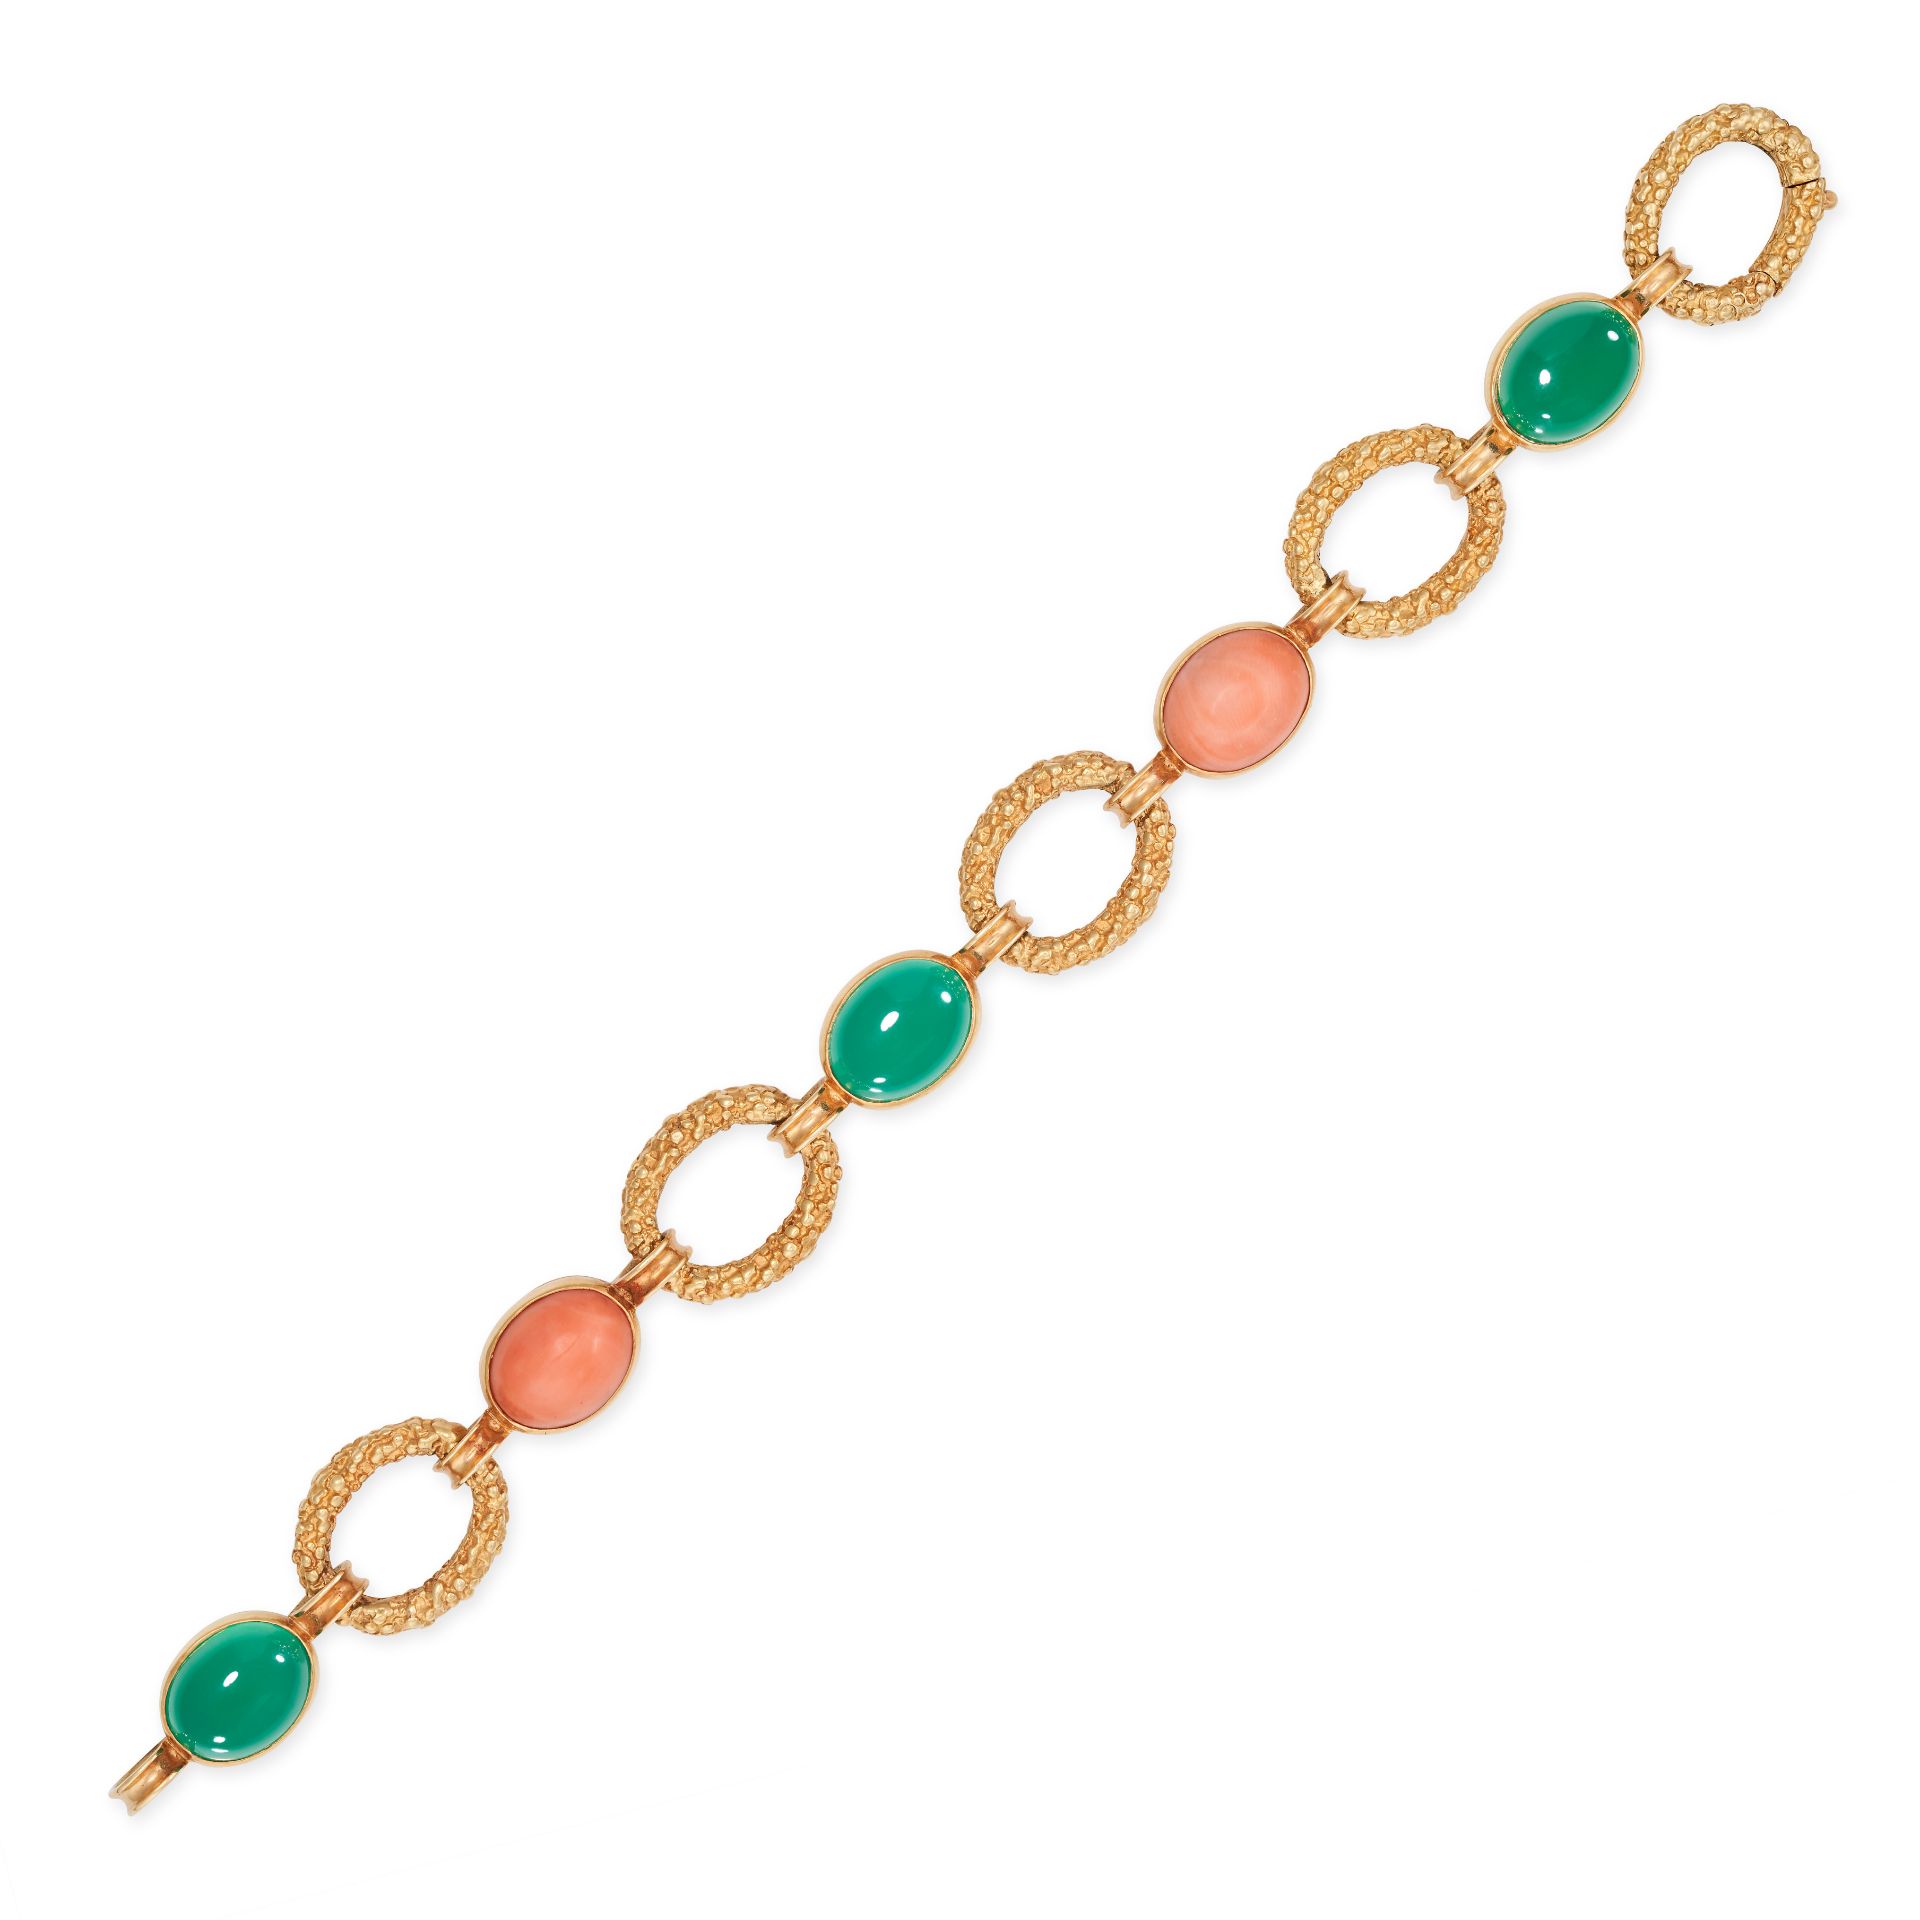 VAN CLEEF & ARPELS, A COLLECTION OF FRENCH CORAL AND CHRYSOPRASE VAN CLEEF & ARPELS JEWELLERY in ... - Bild 2 aus 8